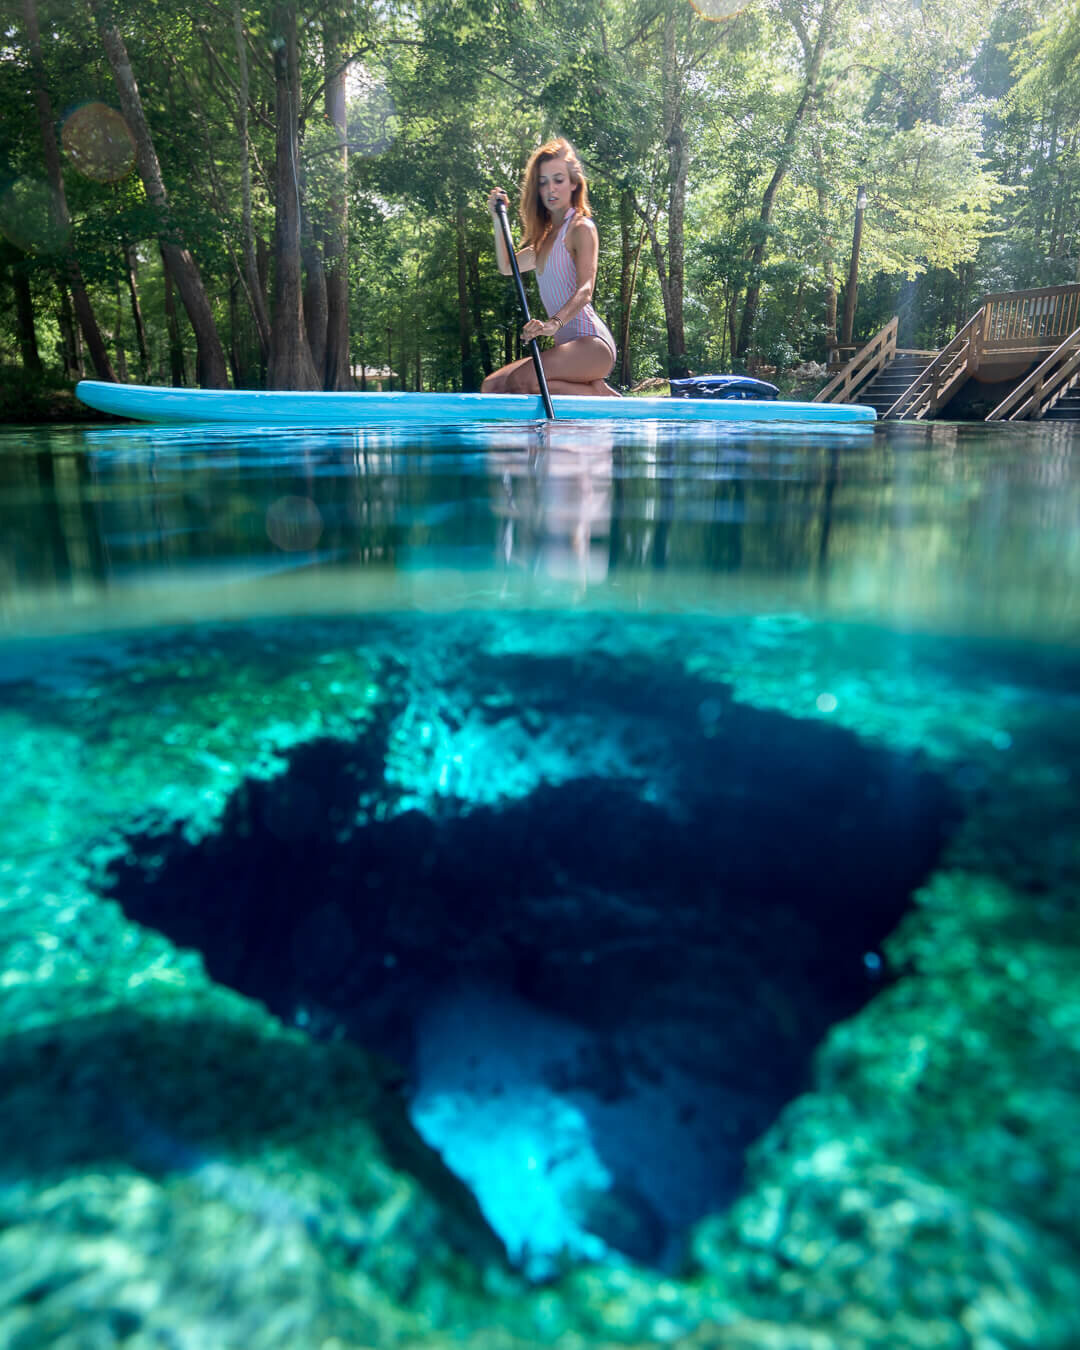 Paddle boarding at Ginnie Springs in Florida.